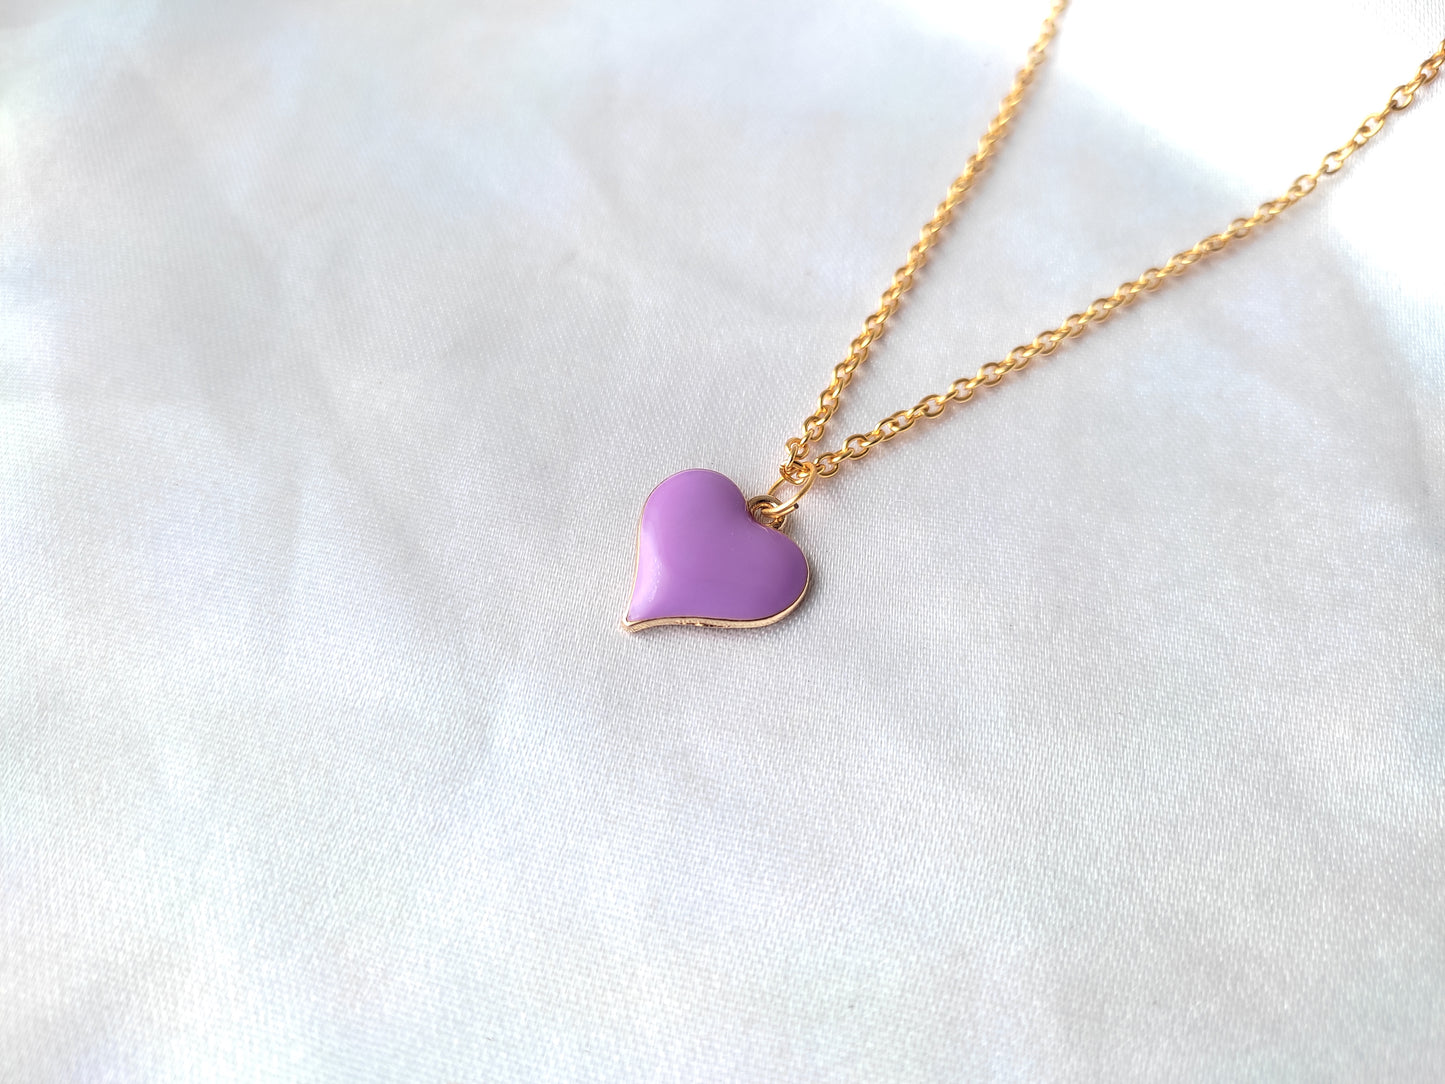 Cute viral trend solid heart charm pendant necklace for women and girls